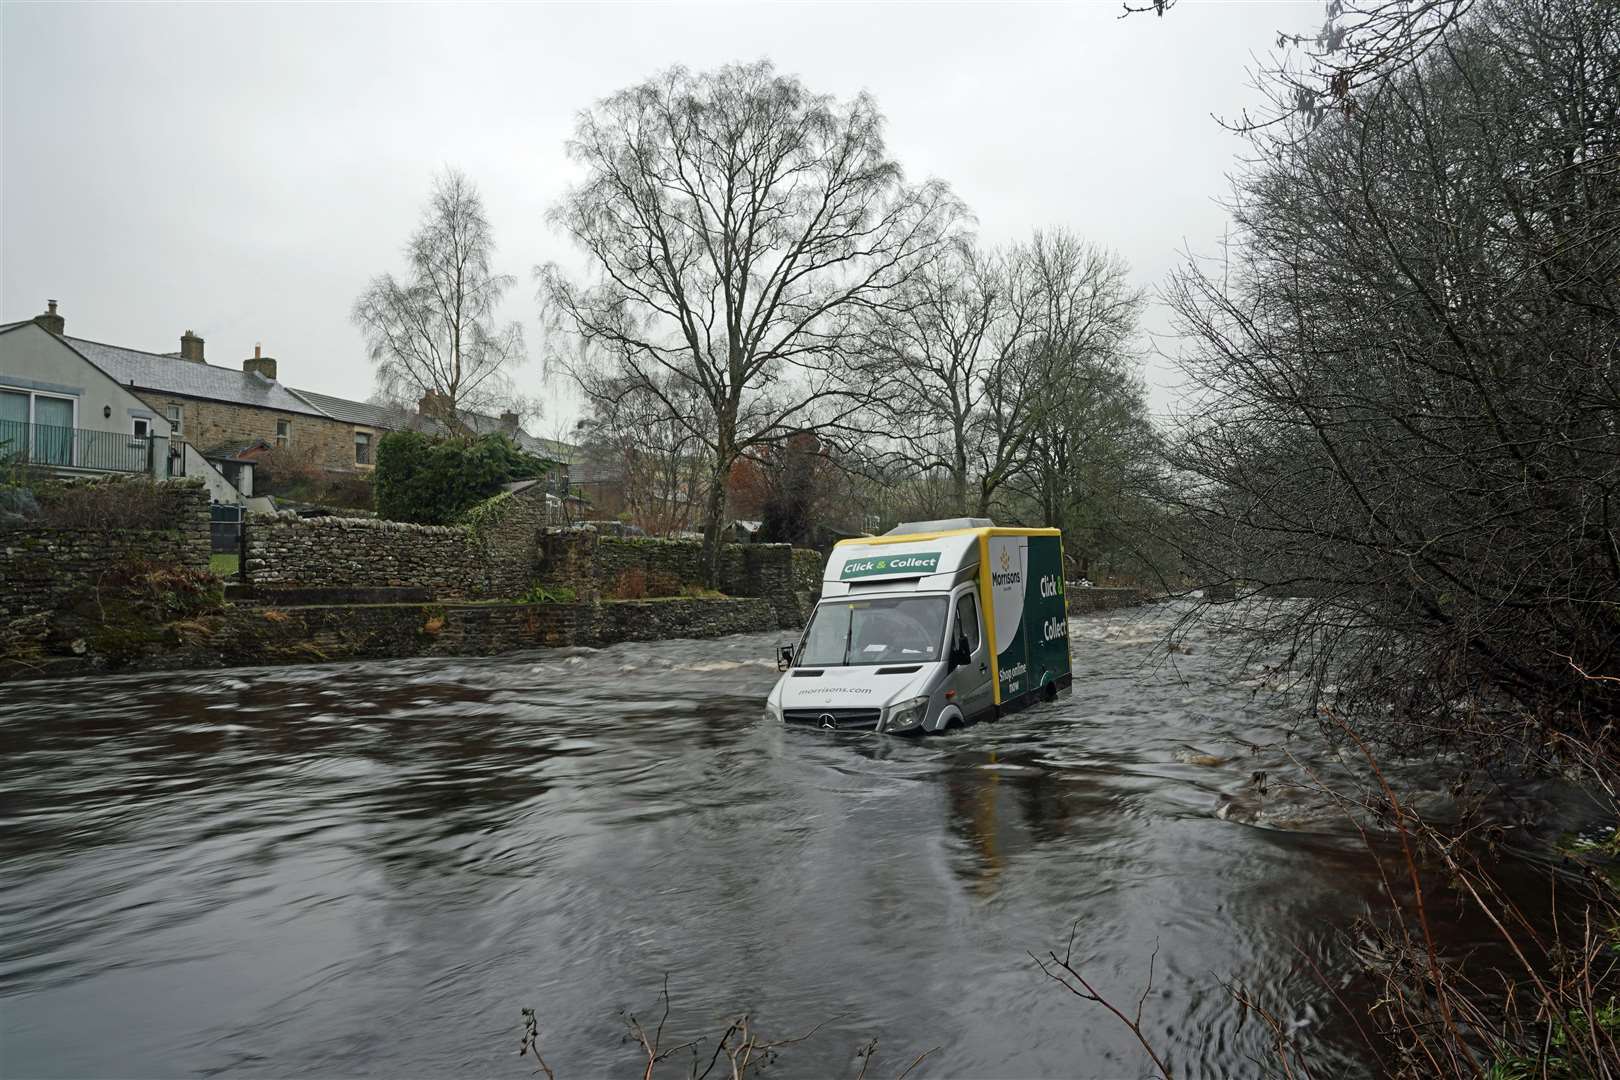 A supermarket delivery van in the River Wear at Westgate, County Durham (Owen Humphreys/PA)